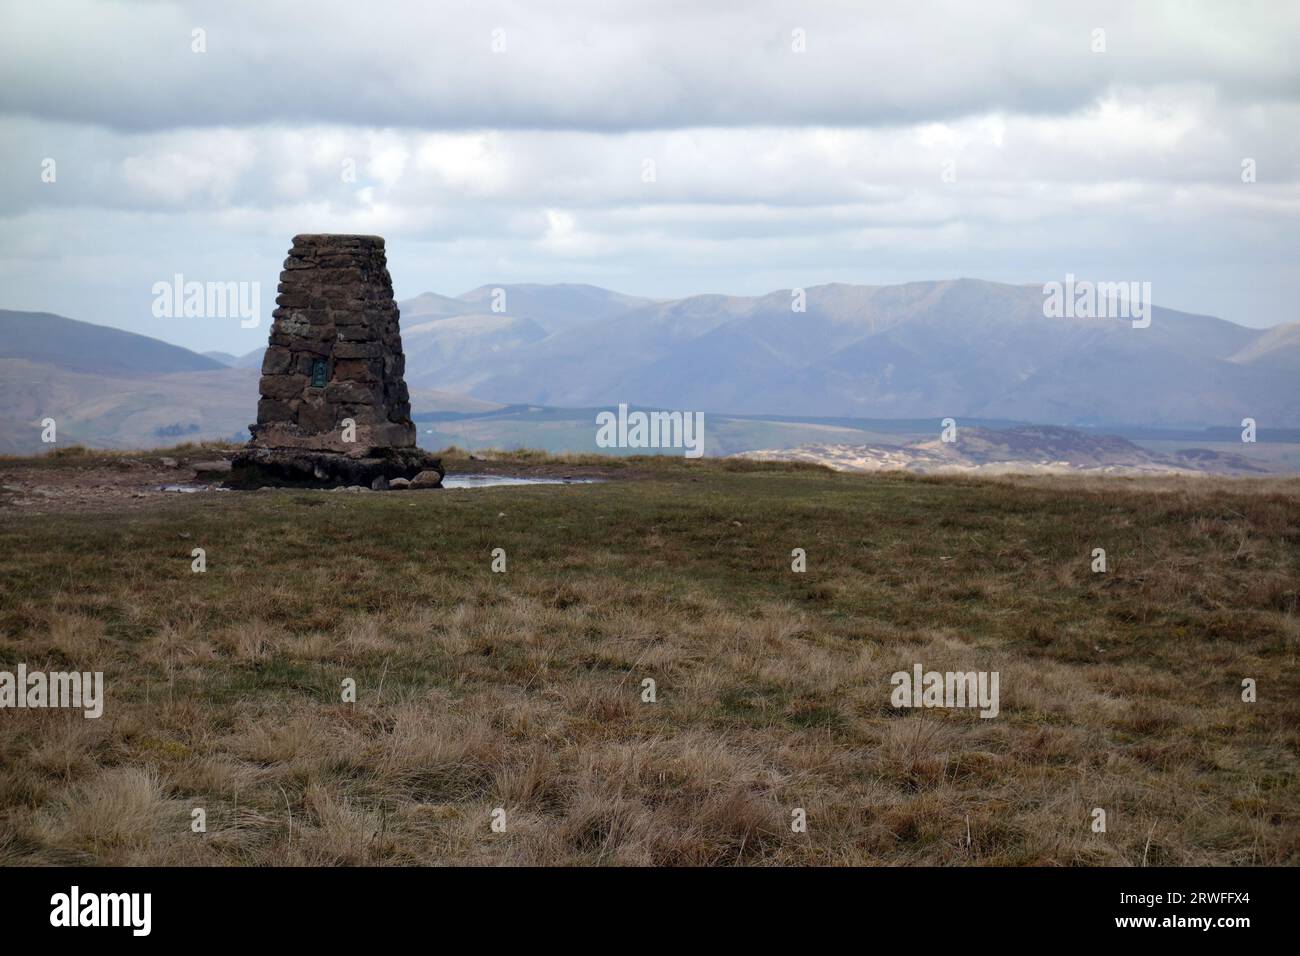 The Stone Trig Point on the Summit of the Wainwright 'Loadpot Hill' in the Lake District National Park, Cumbria, England, UK Stock Photo